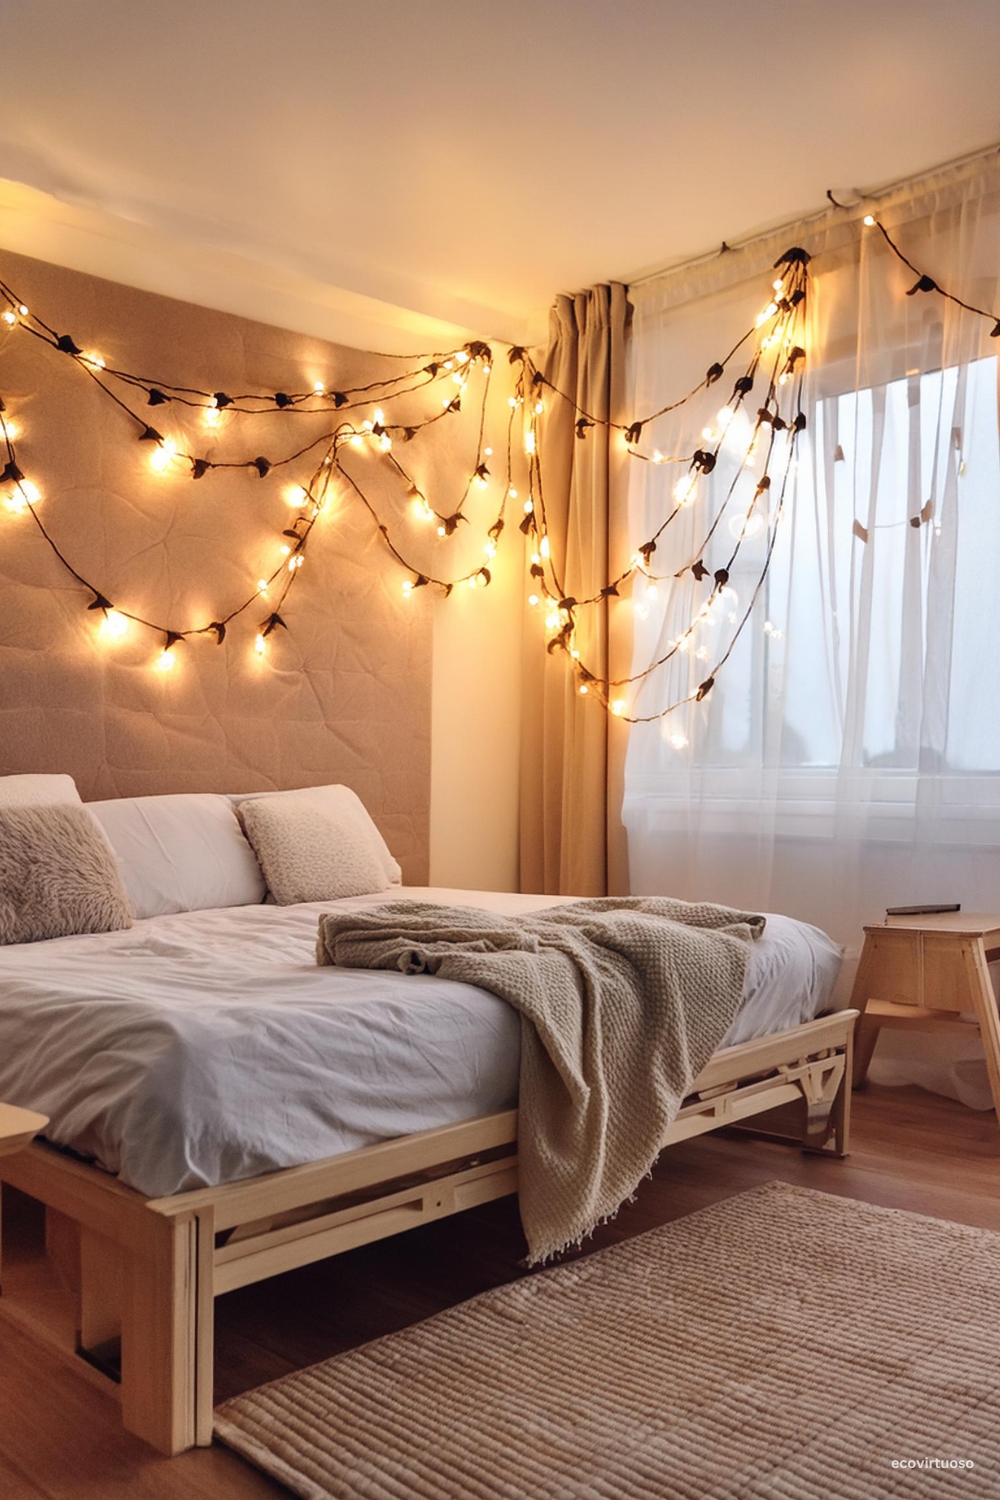 a bed and stringlights